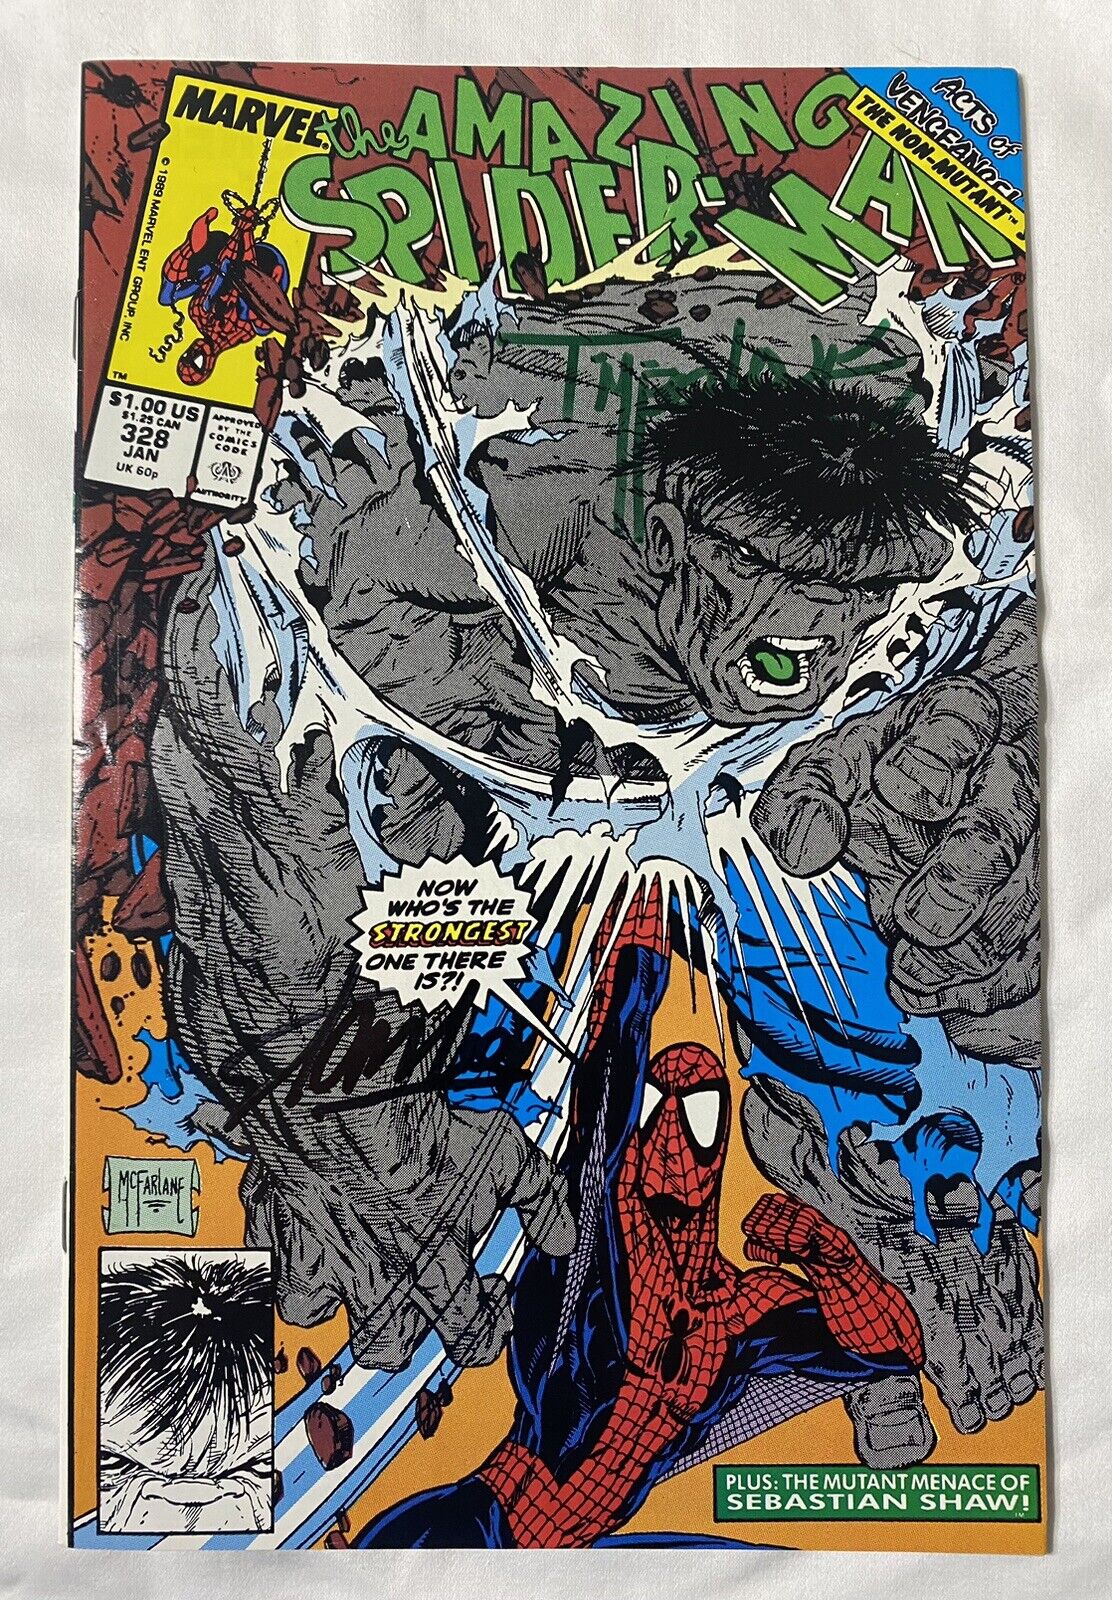 Amazing Spider-Man #328 Signed Stan Lee & Todd McFarlane VS Hulk Classic Cover